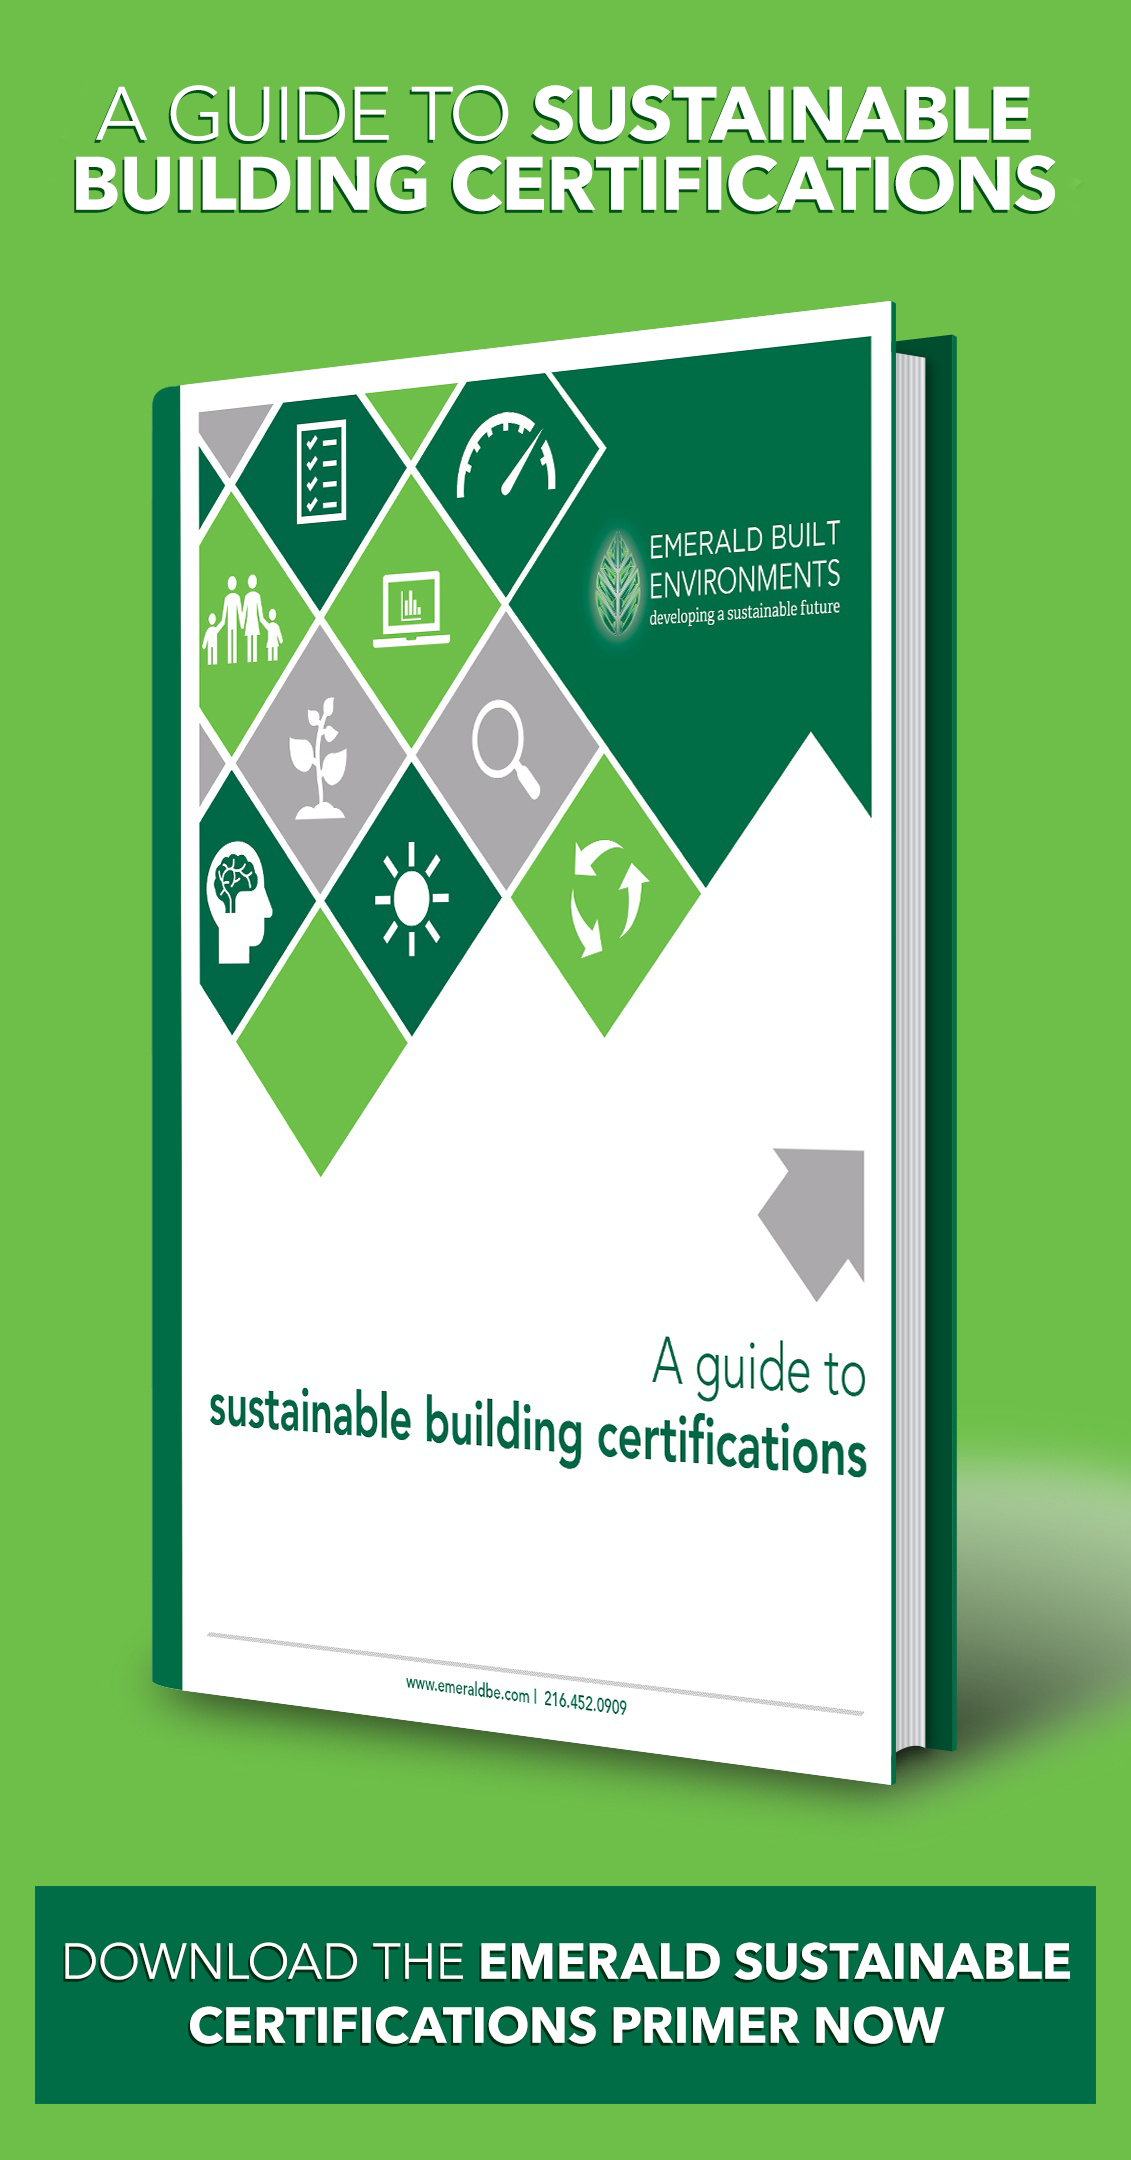 Sustainable building certifications